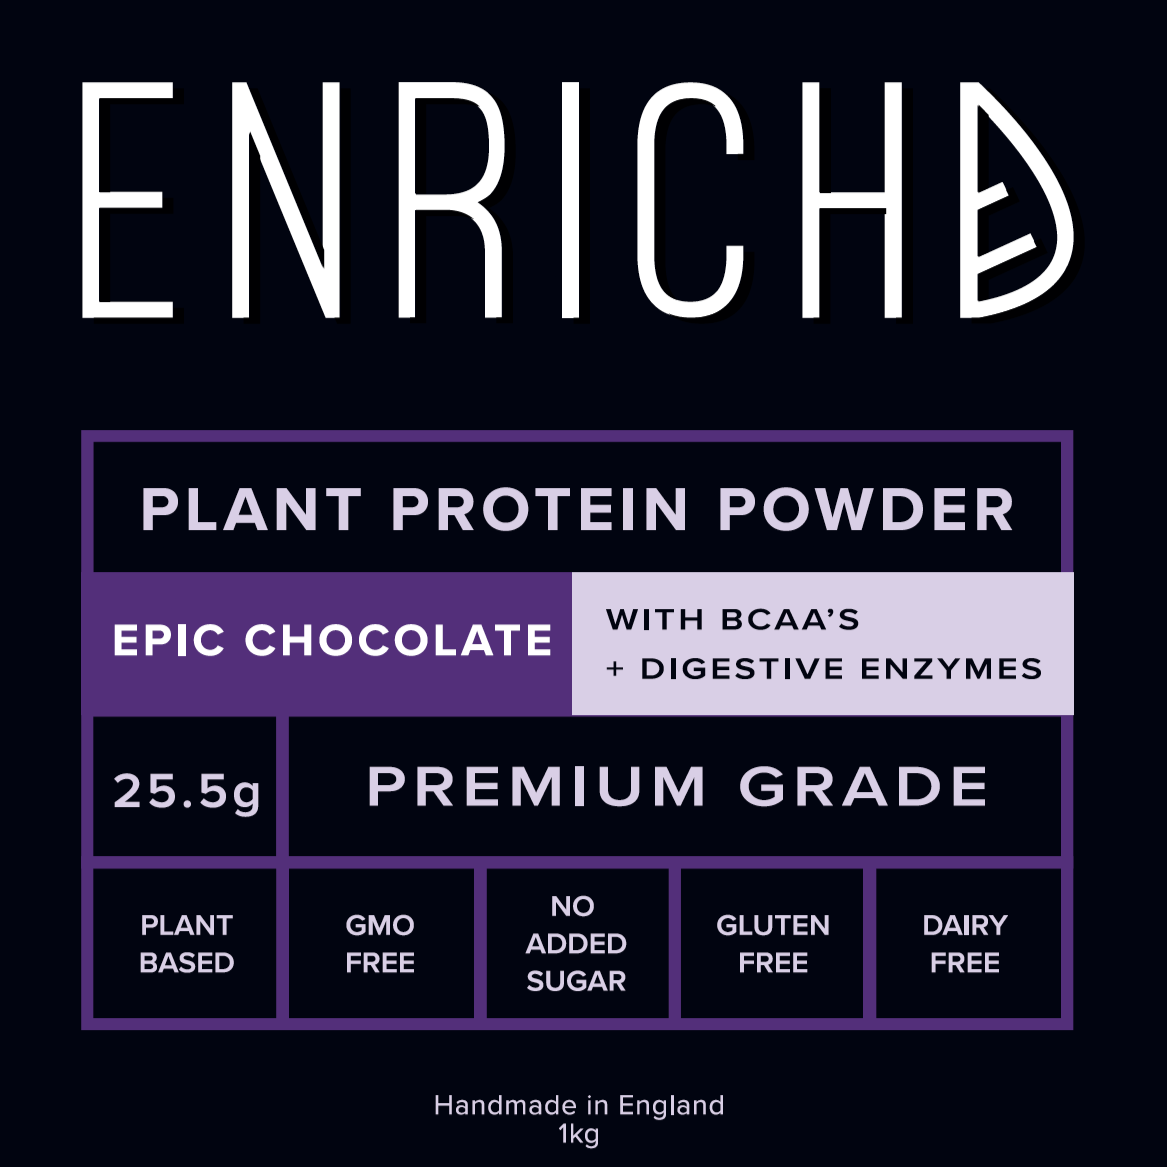 ENRICHD SUPERFOODS Protein EPIC CHOCOLATE Protein Powder (BCAA's) Plant Based & Vegan